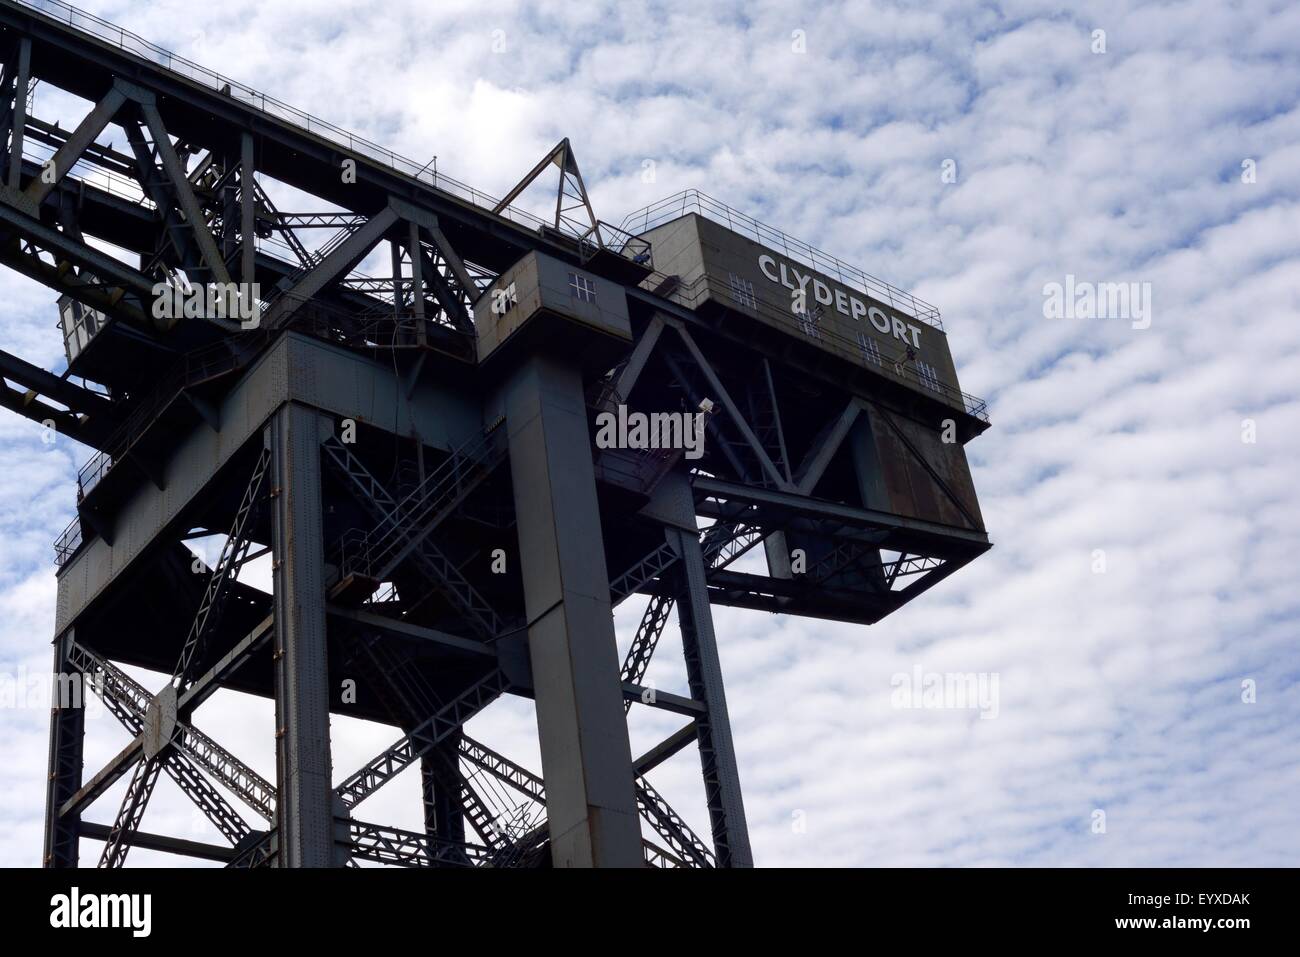 Finnieston or Clydeport Crane, a disused giant cantilever crane Glasgow. Stock Photo